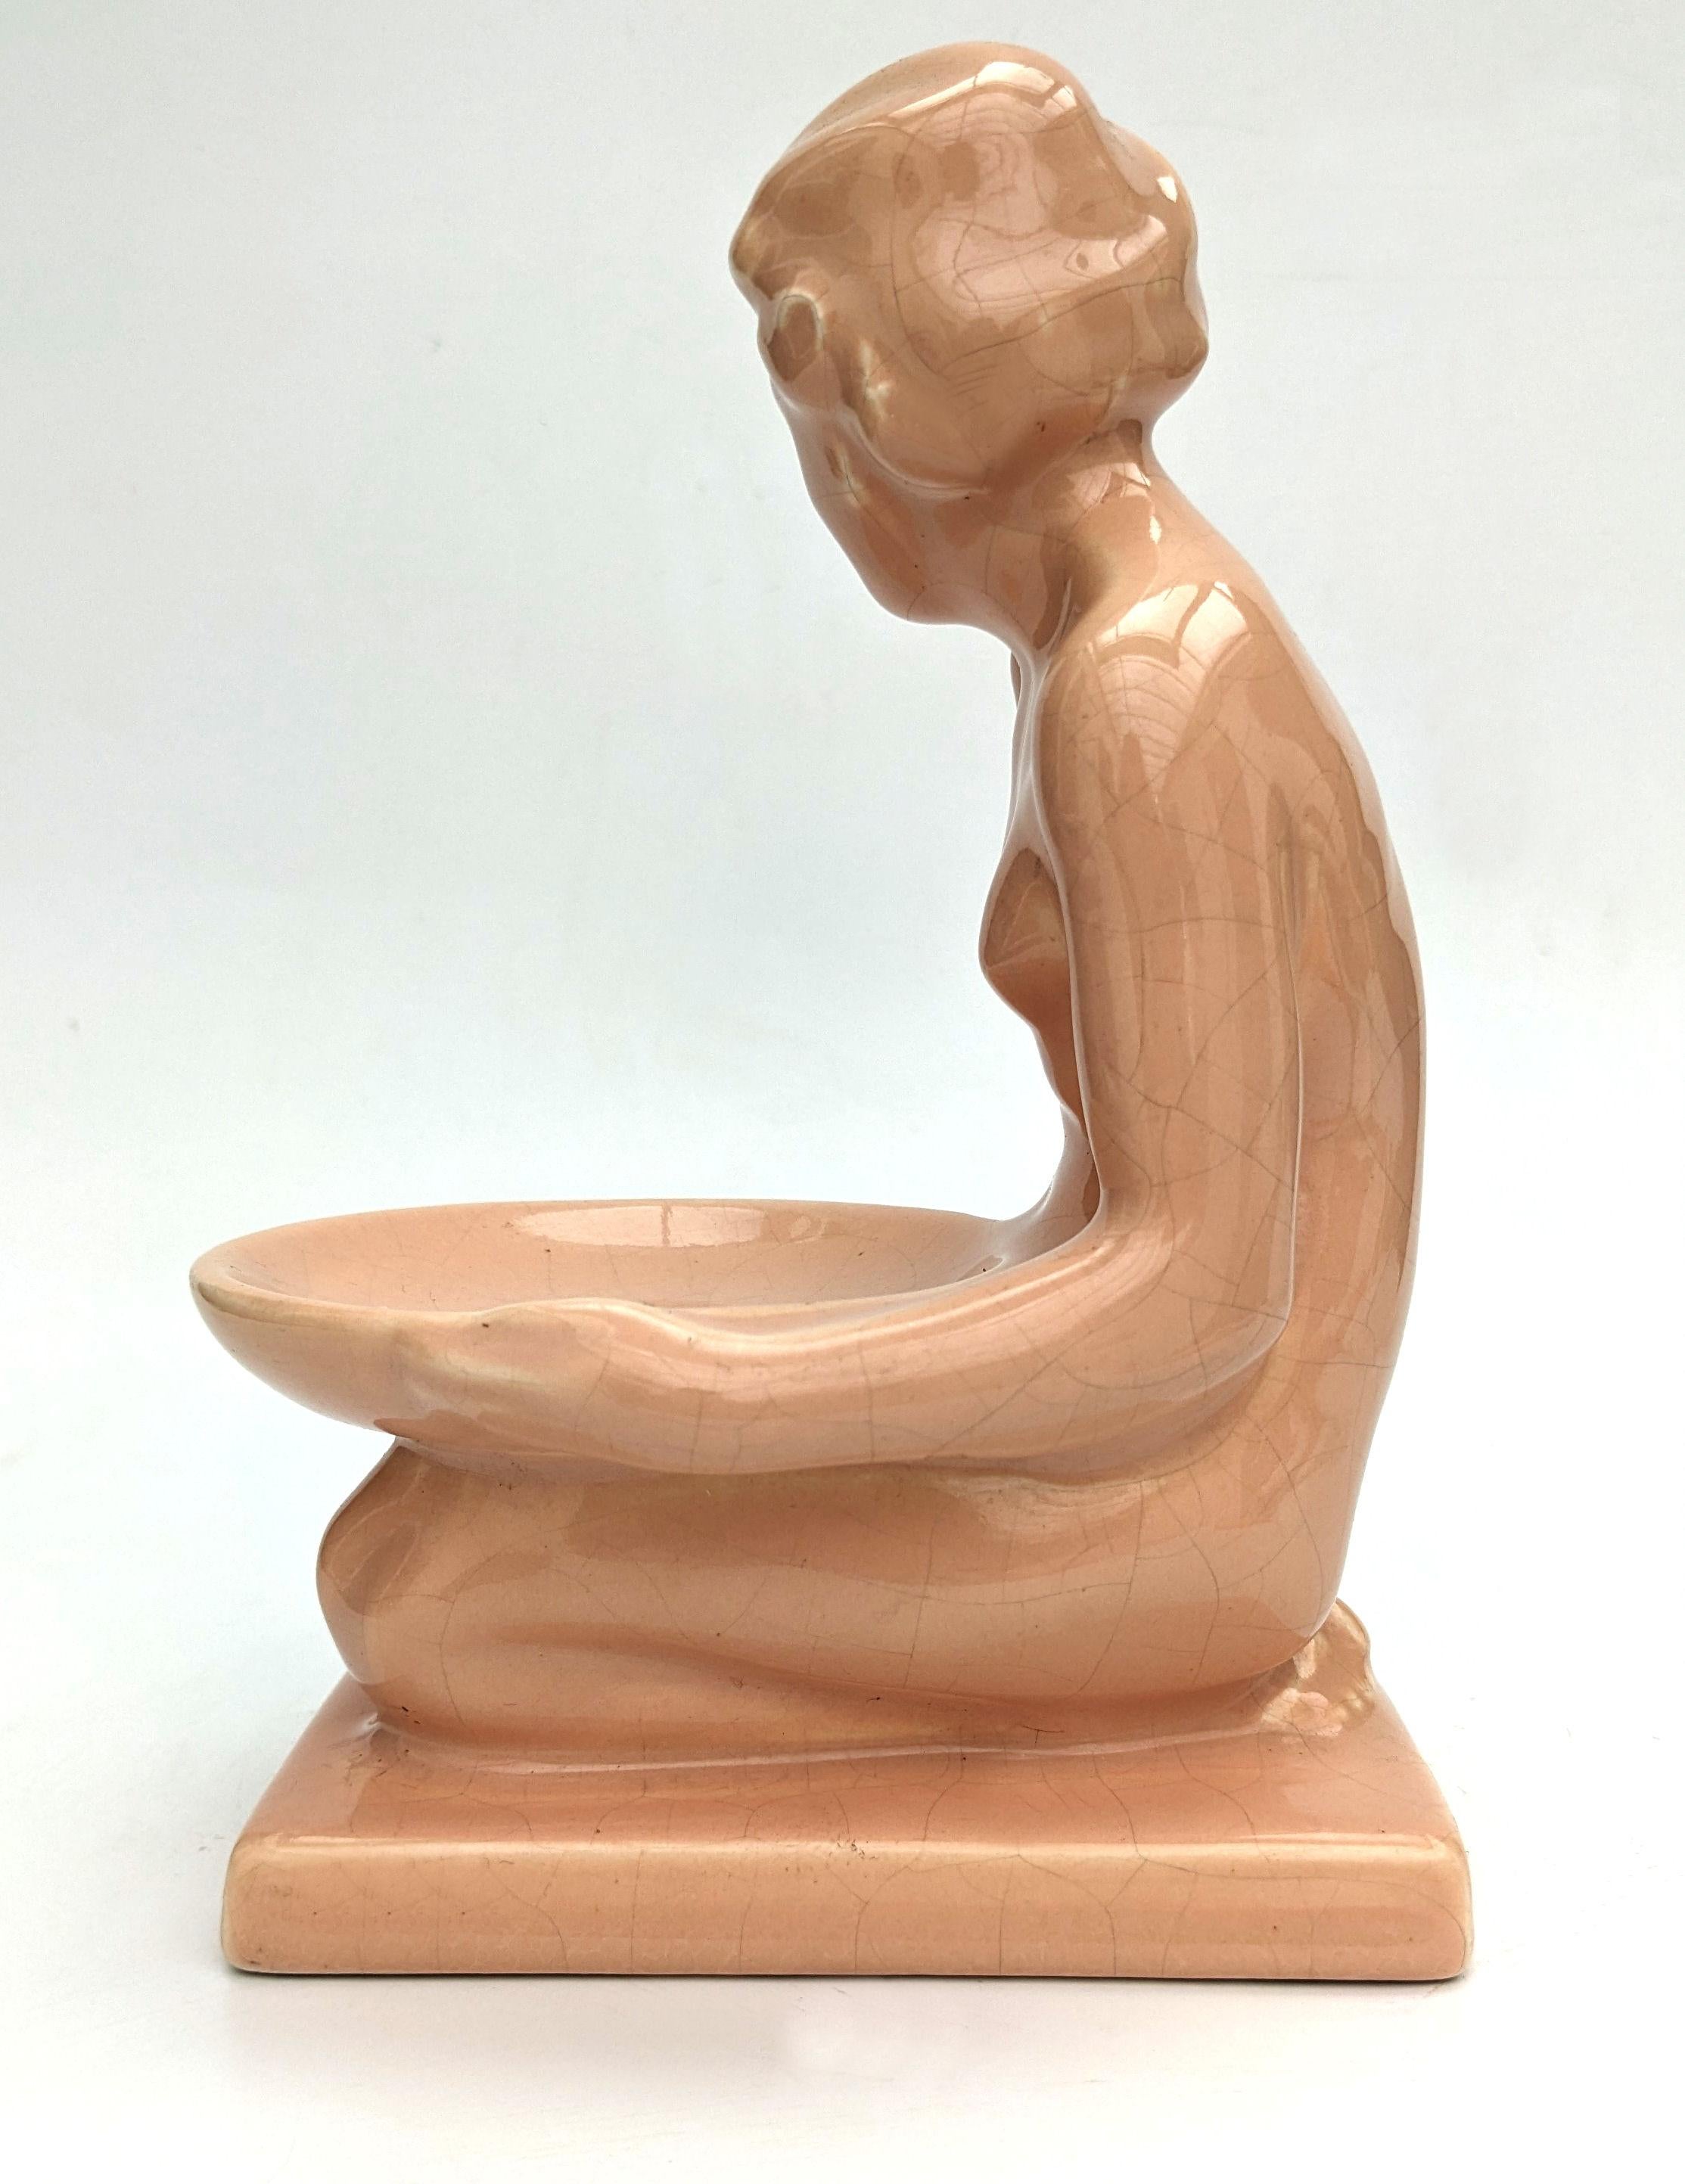 For your consideration is this charming Art Deco ceramic figure depicting a nude young girl with a shallow bowl on her lap. This figure is a great size and so could display as she is or you could use her as a soap dish. She's without damage or